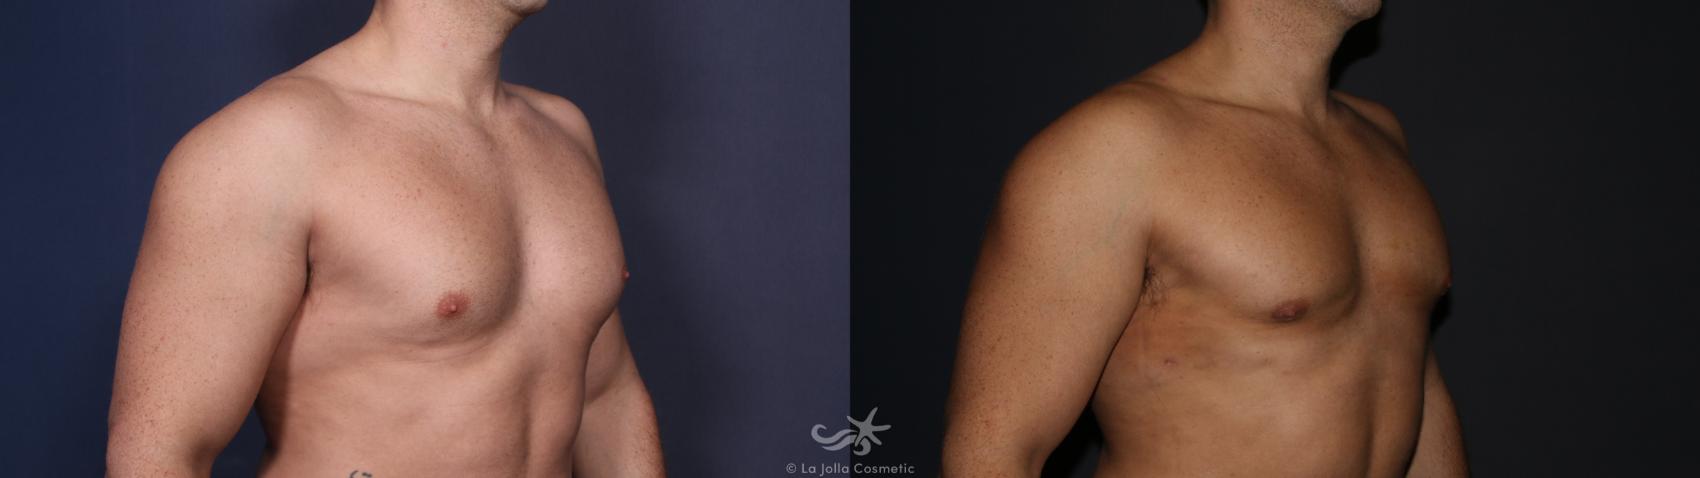 Before & After High Definition Liposuction Result 125 Right Oblique View in San Diego, CA